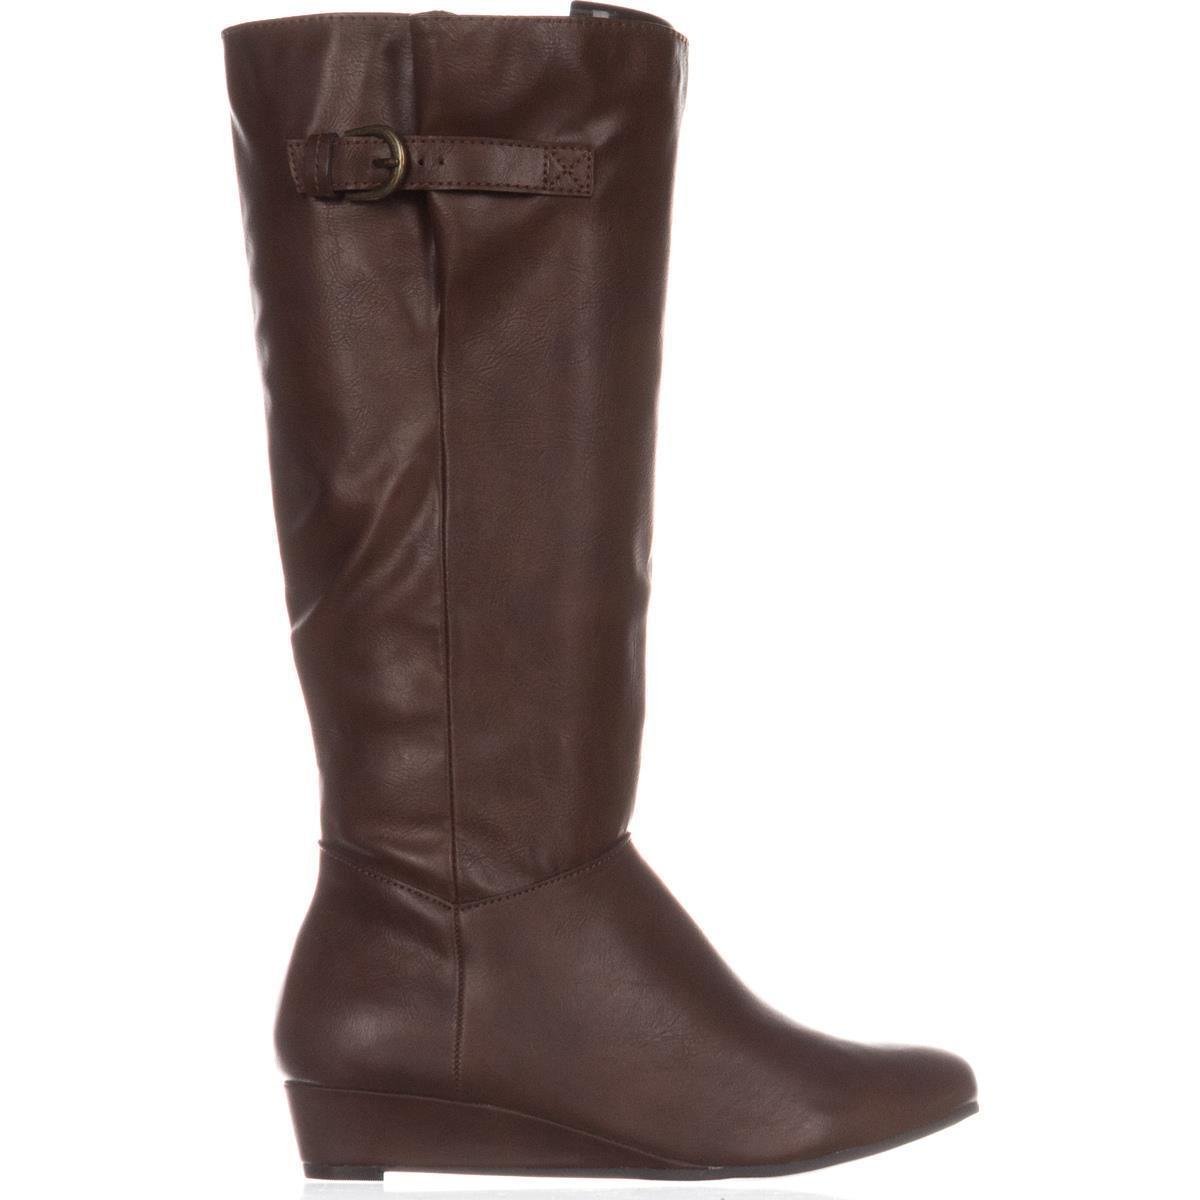 Style & Co. Womens Boots in Brown Color, Size 6 GJH | eBay